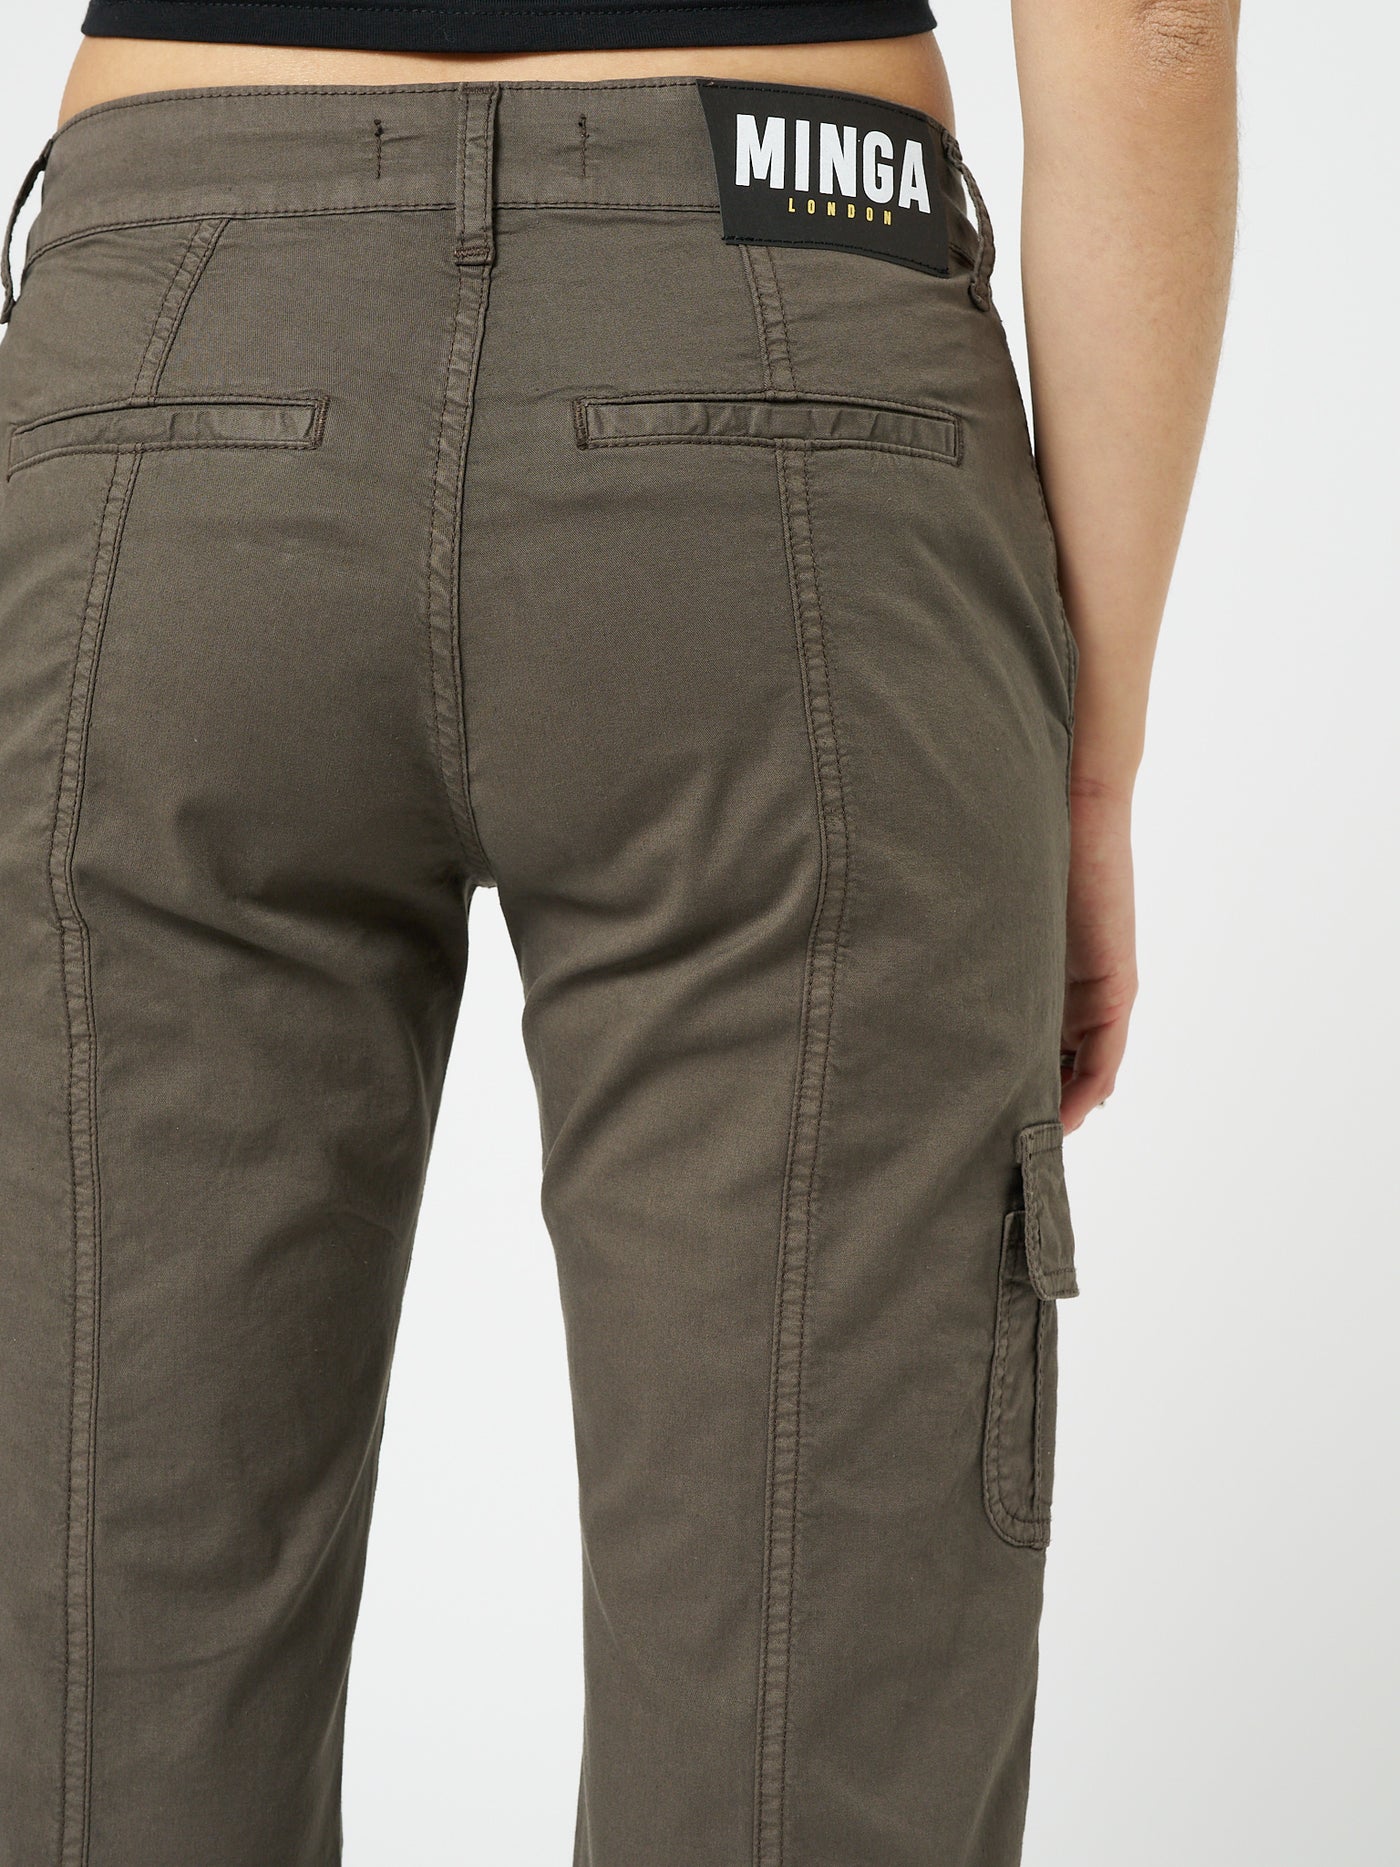 Embrace the Y2K fashion trend with these brown cargo pants featuring a stylish and functional design. Perfect for an edgy and retro-inspired look.